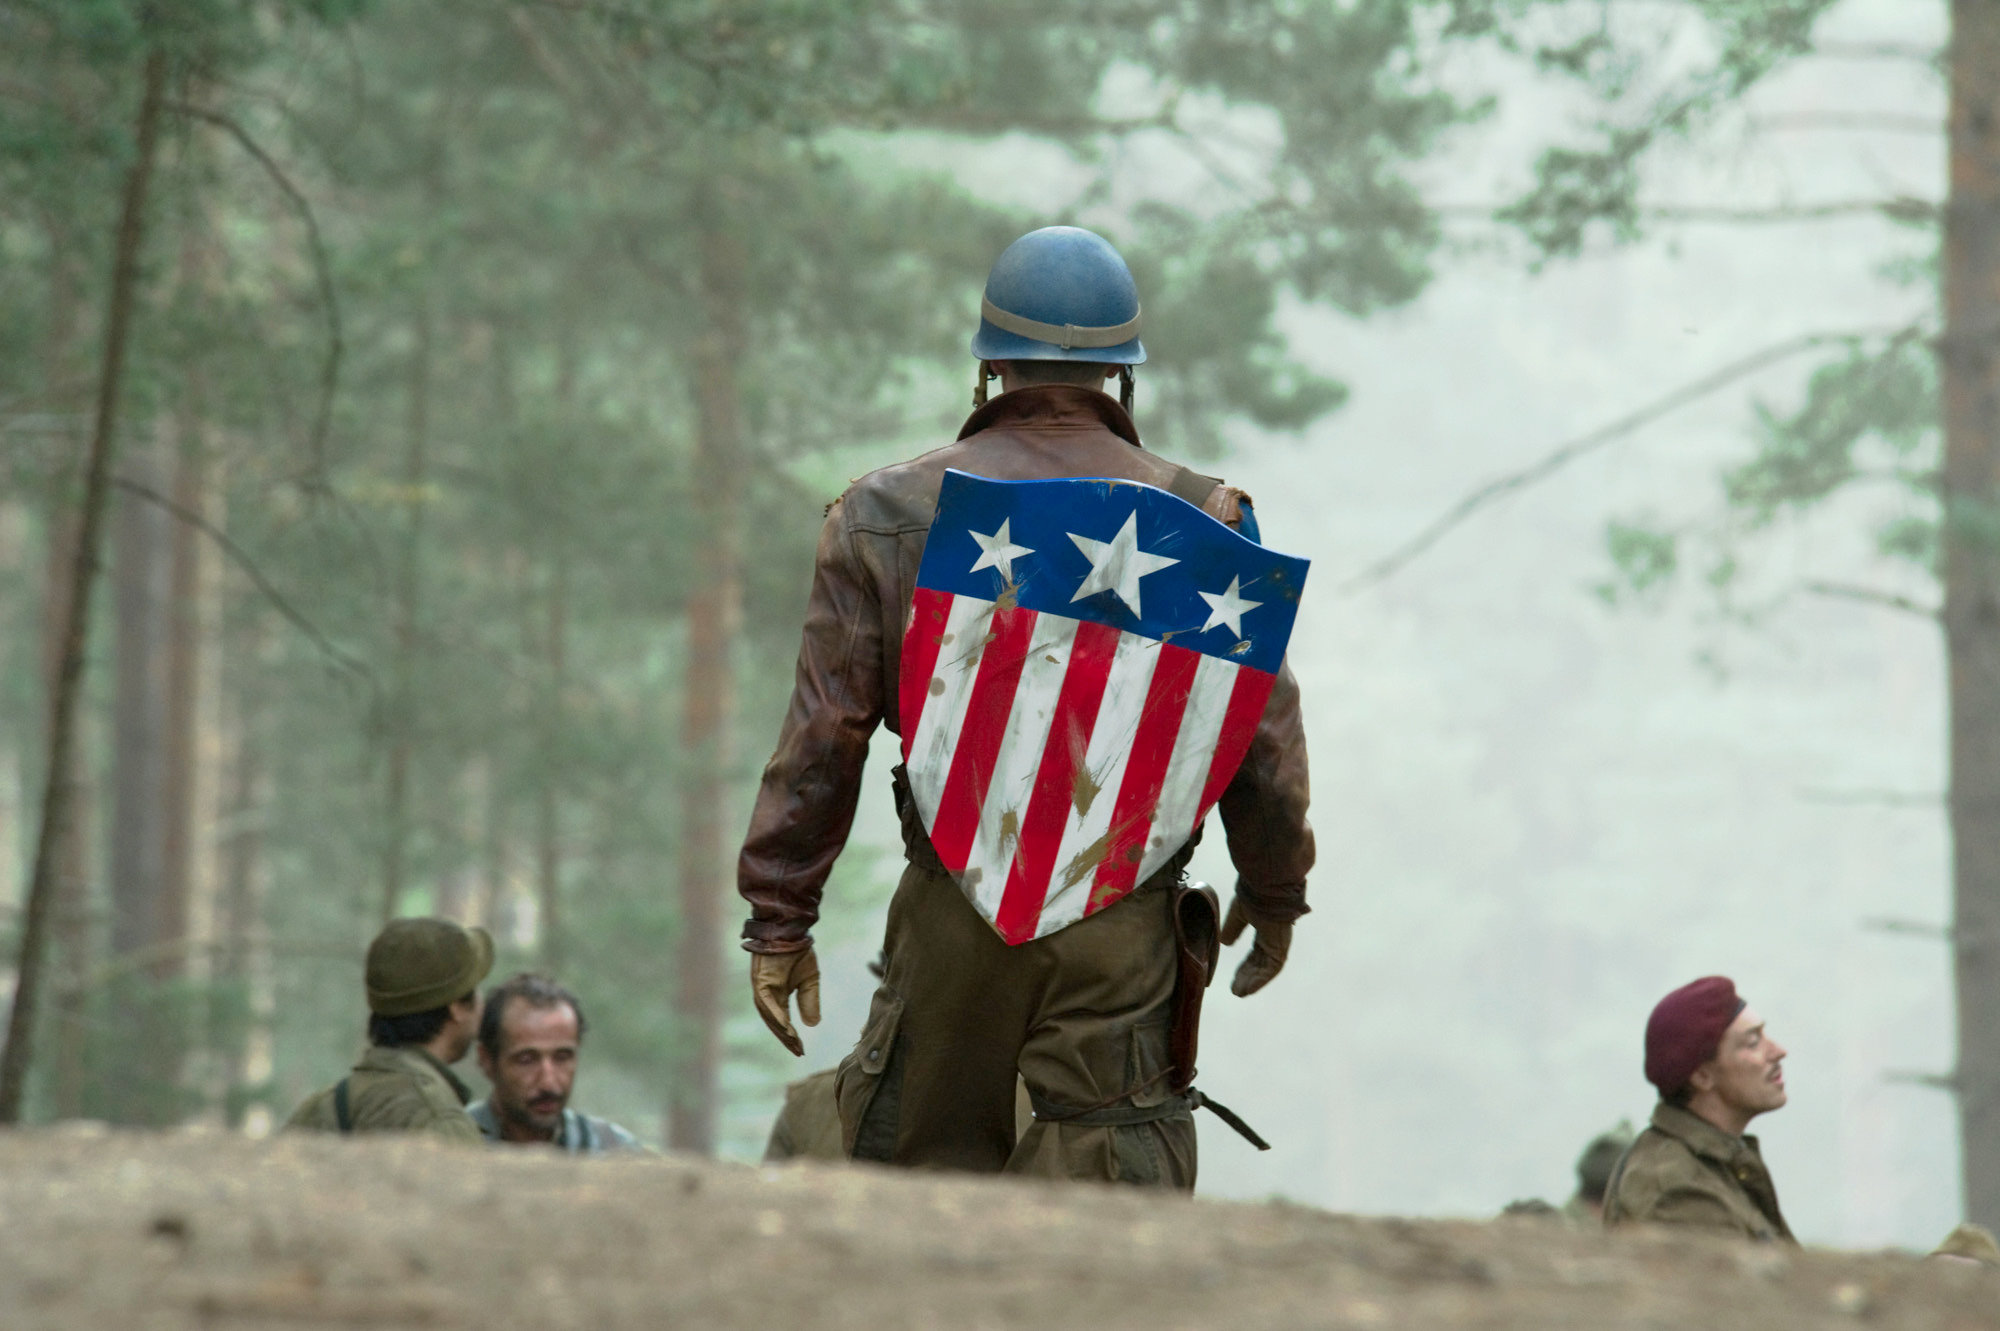 Chris Evans stars as Steve Rogers in Paramount Pictures' Captain America: The First Avenger (2011). Photo credit by: Jay Maidment.